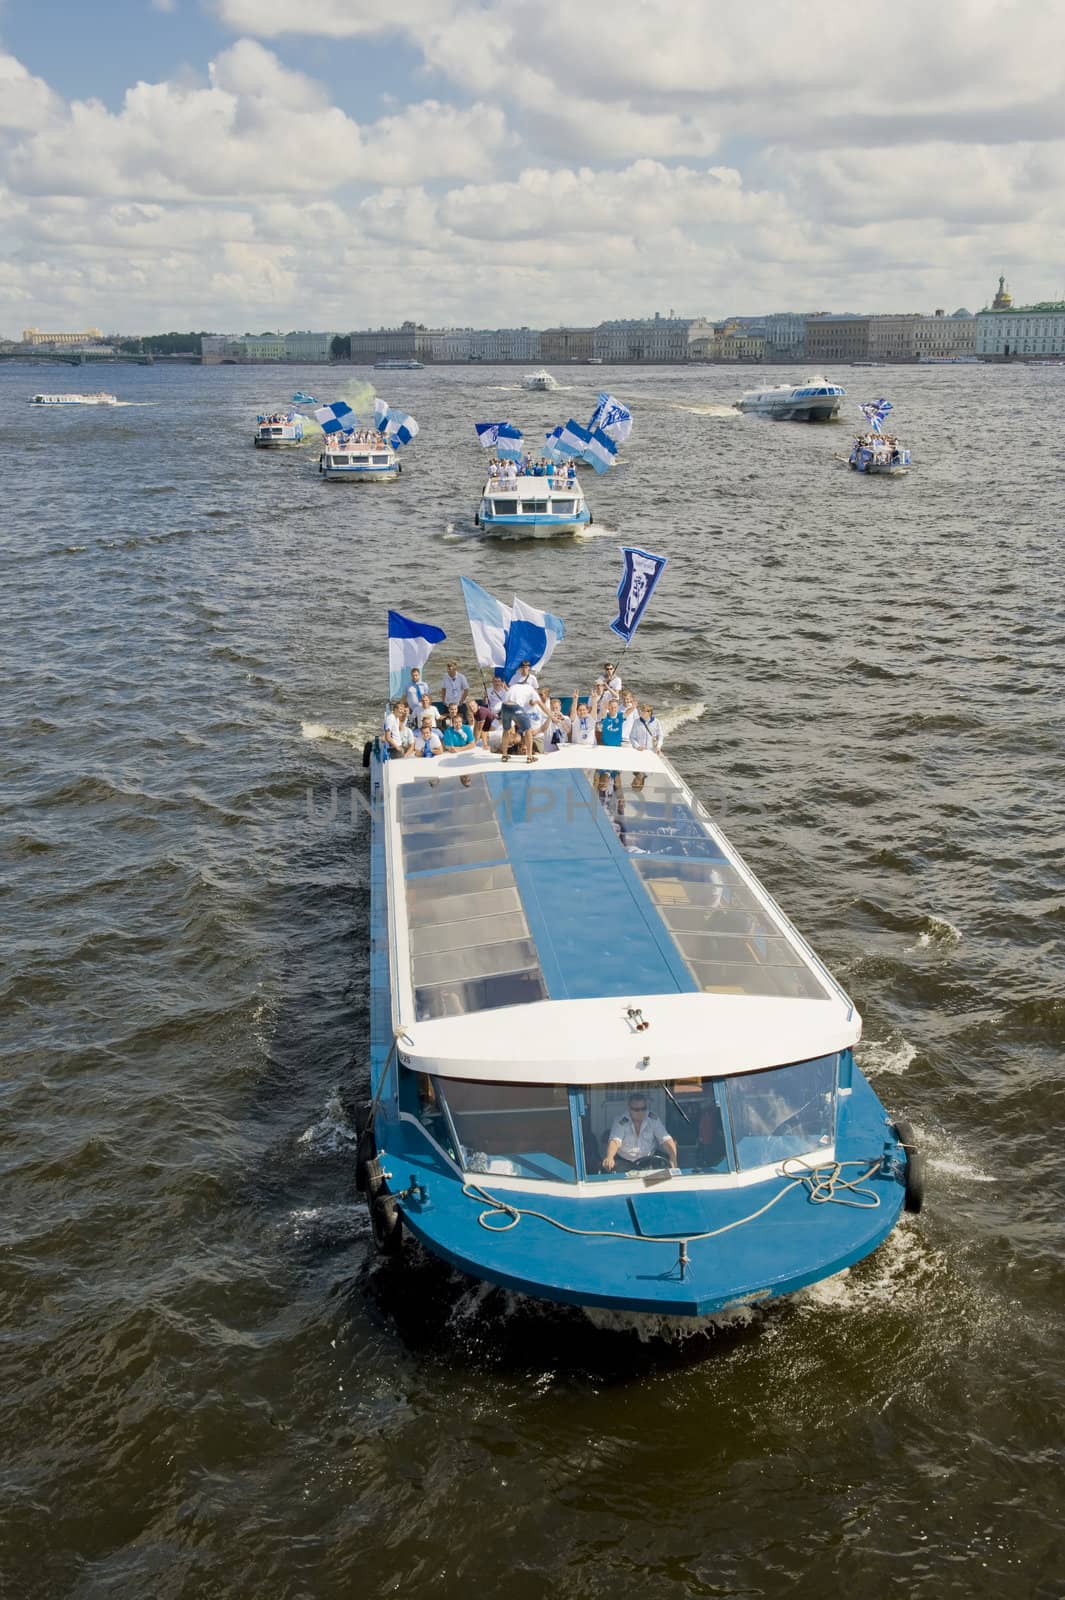 Football fans celebrate a victory of football club ZENITH by boats down the river Neva in St.-Petersburg, Russia 